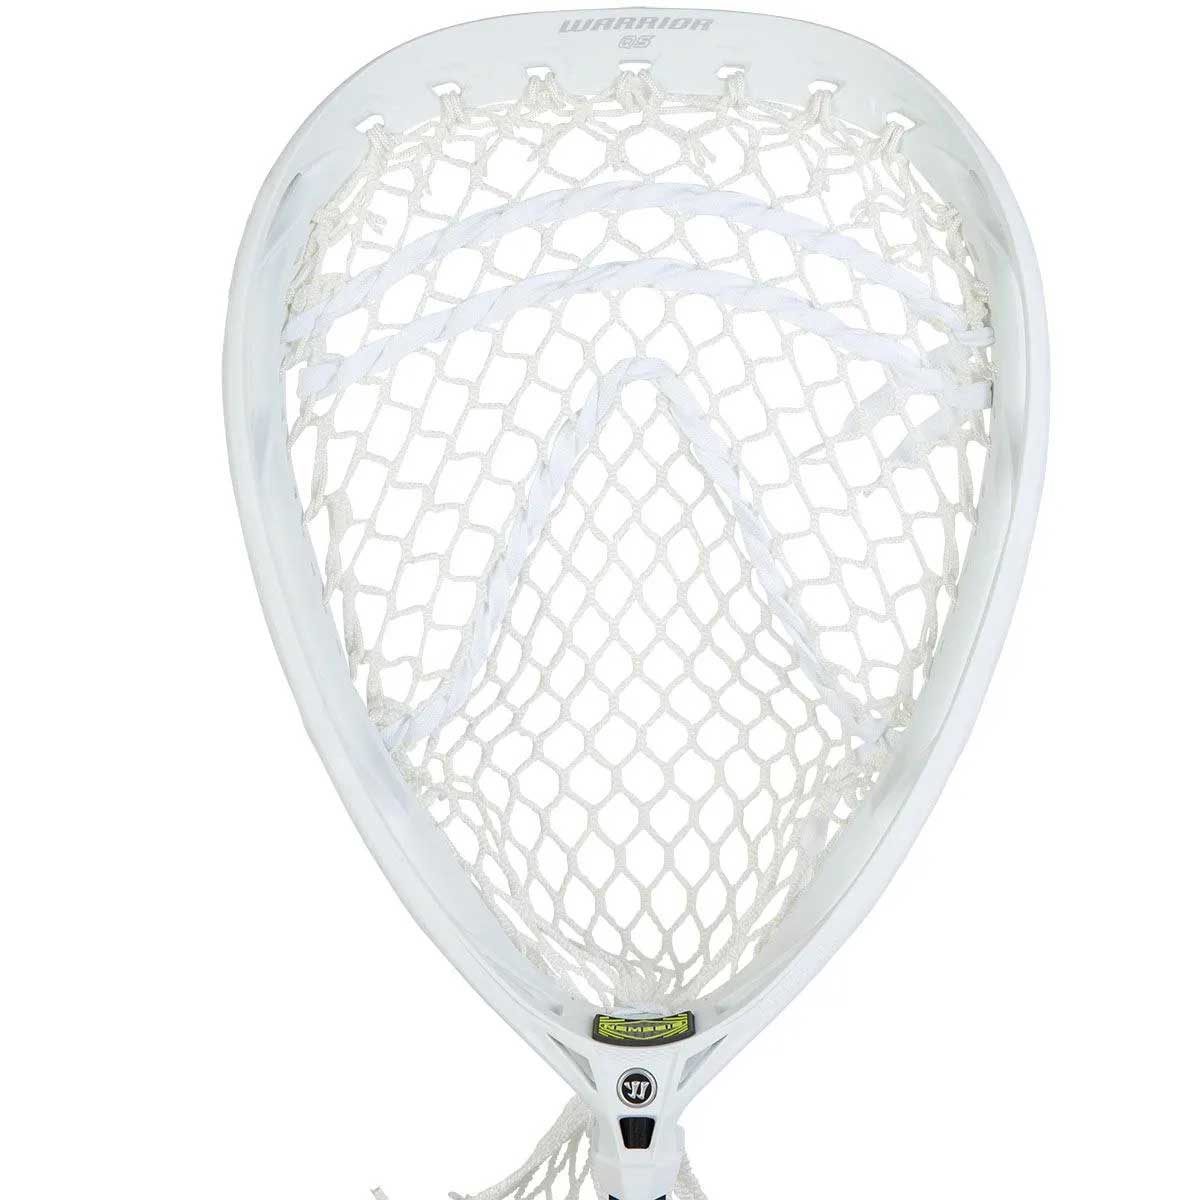 Picture of the white Warrior Nemesis QS GLE Strung Lacrosse Goalie Head